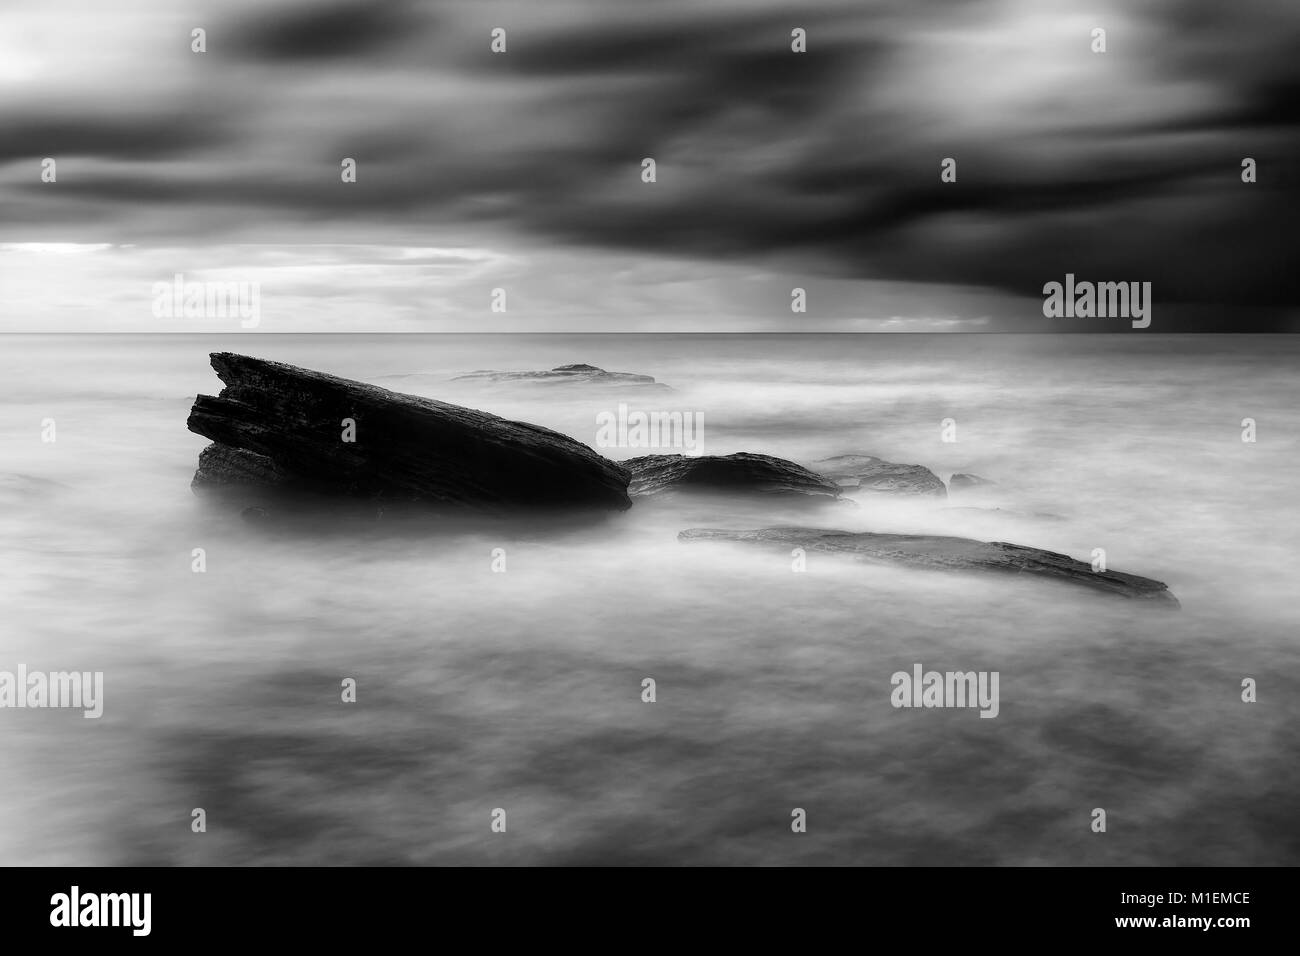 Dark stormy weather at Bungan beach of Sydney Northern beaches wiht massive black boulder rock standing out of blurred surfing water of Pacific ocean. Stock Photo